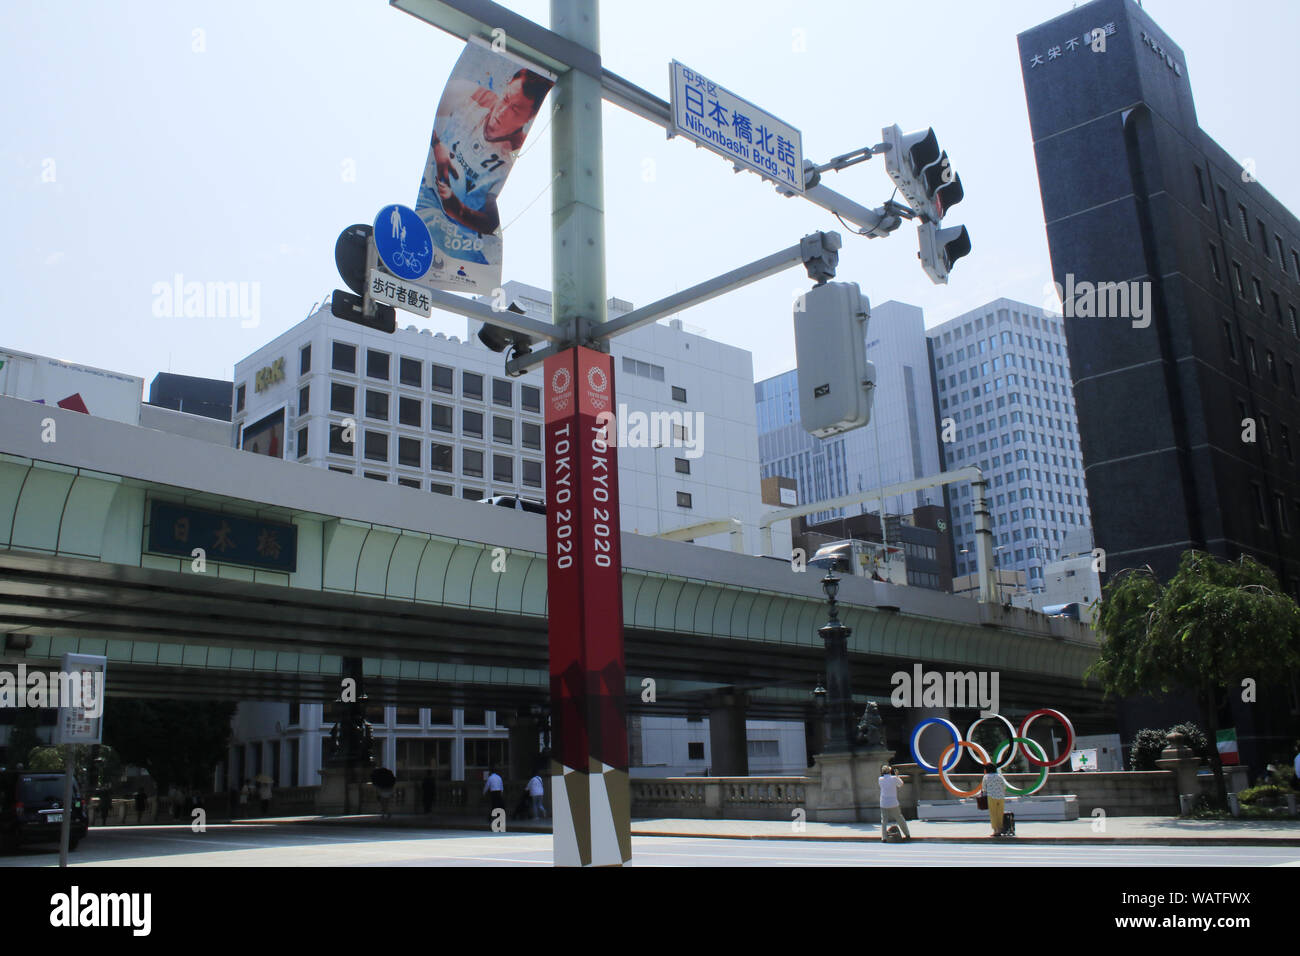 The display with portraits of athletes and the Tokyo Olympics and Paralympic logos appear in Tokyo to mark one year away from the Olympics Games 2020. Stock Photo